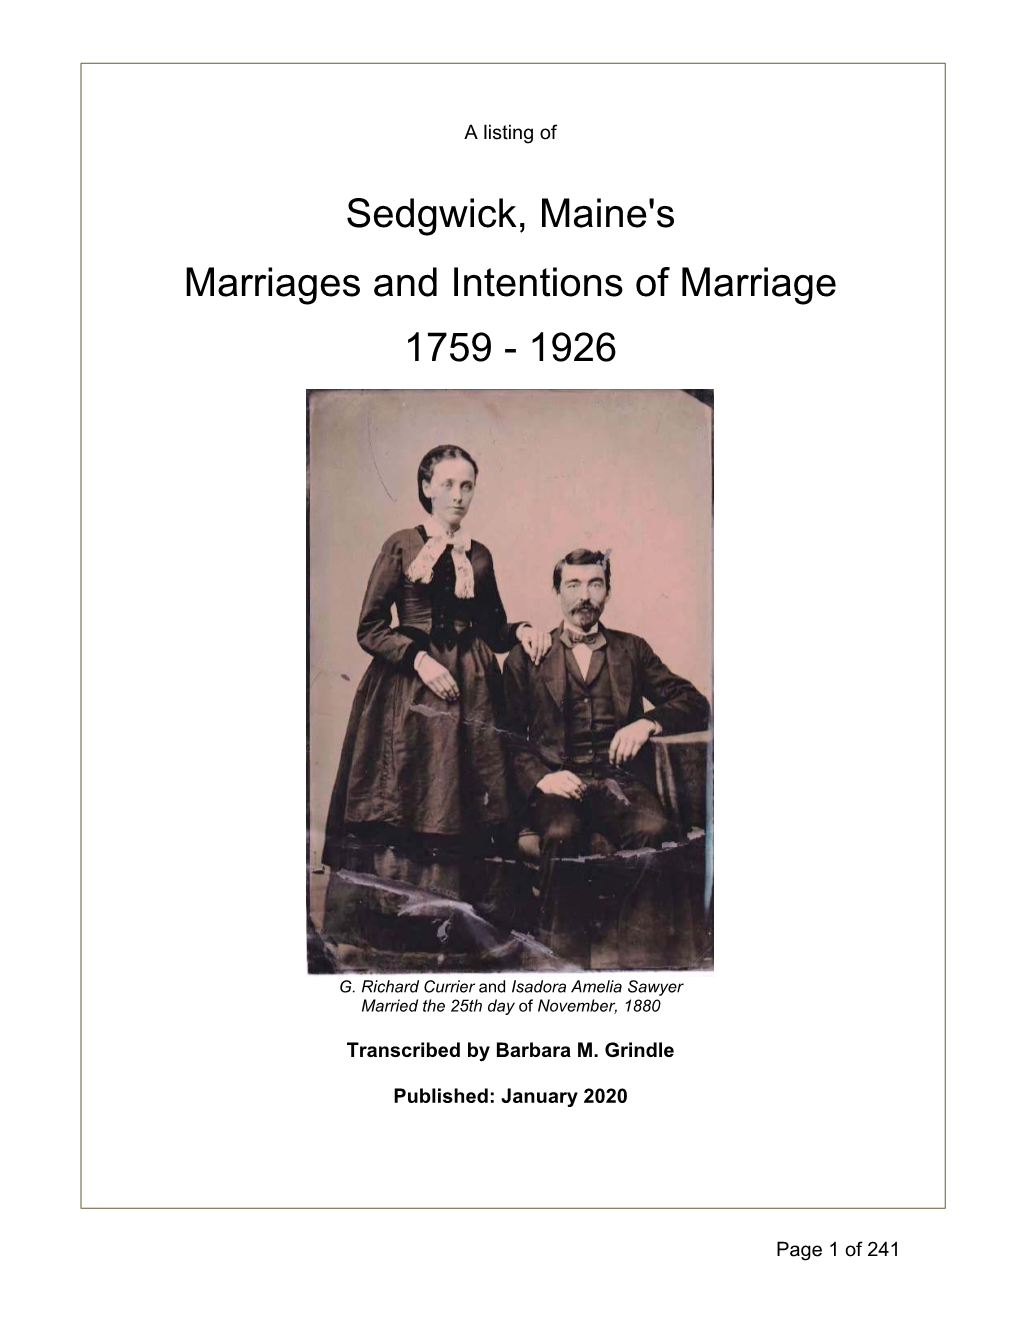 Sedgwick, Maine's Marriages And